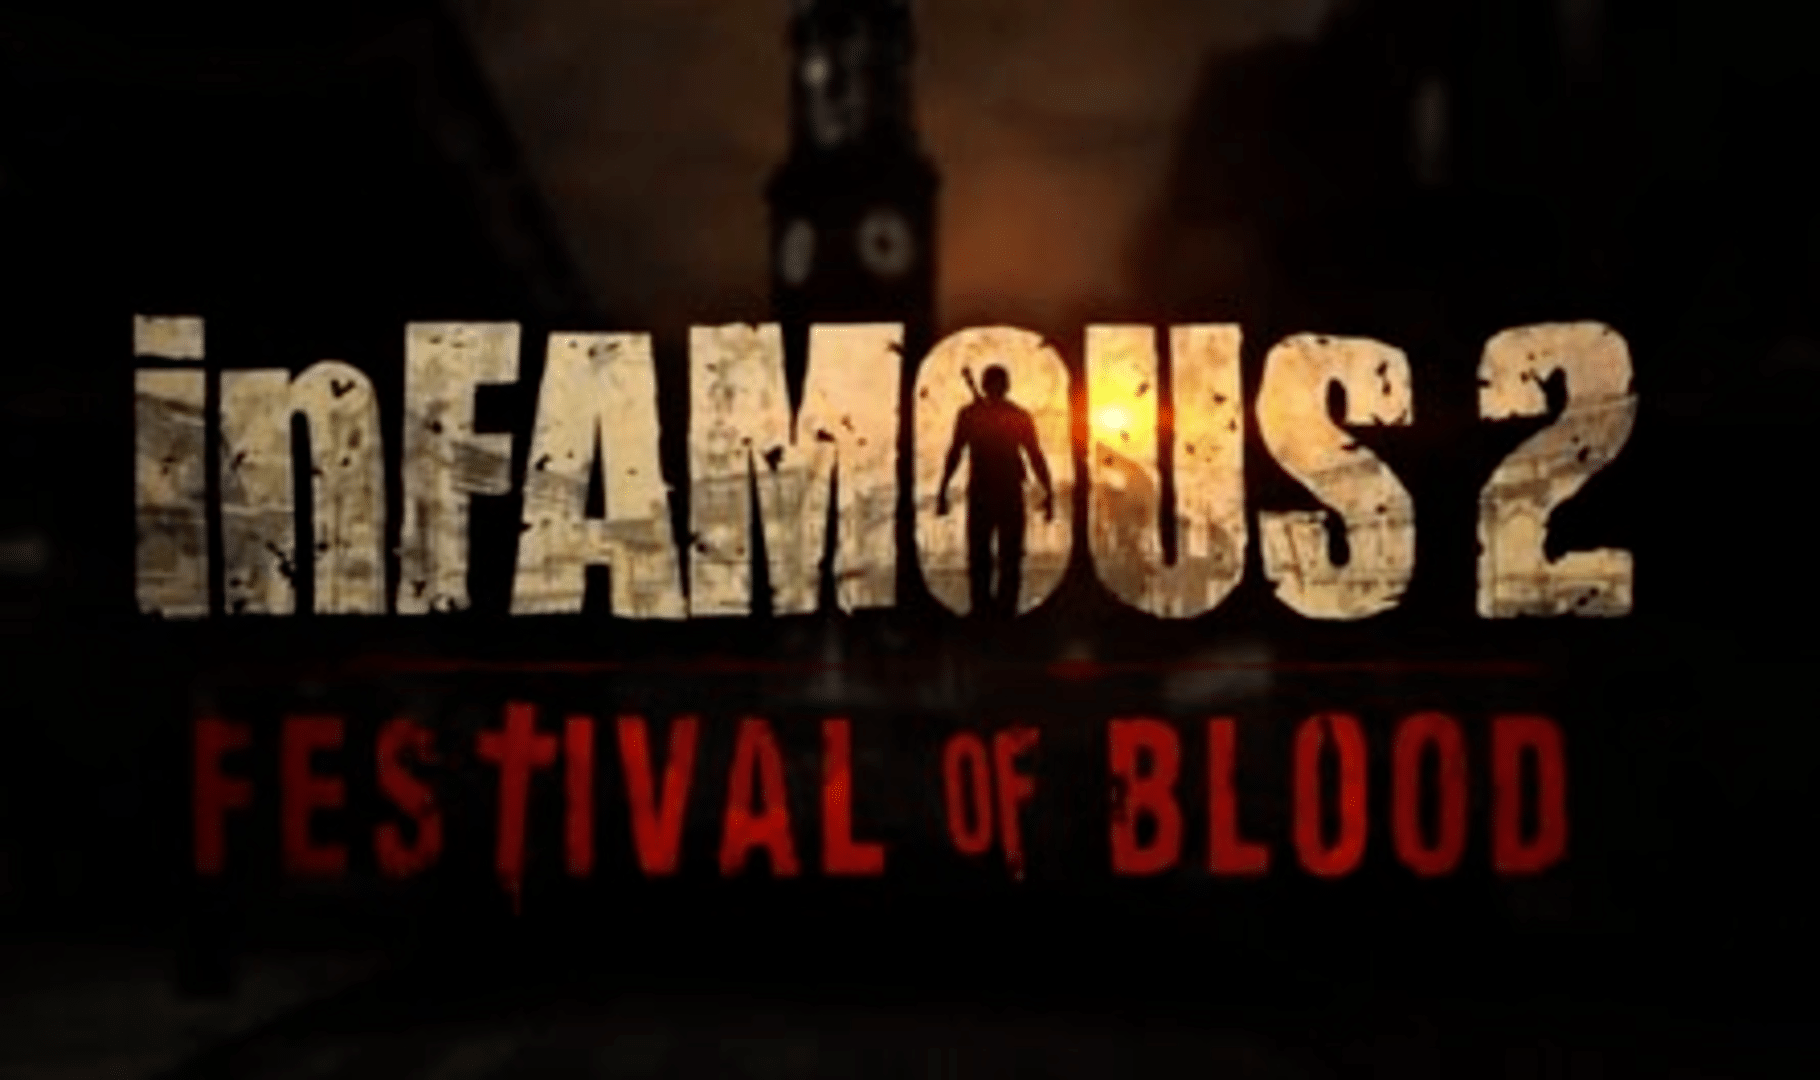 infamous 2 festival of blood music video